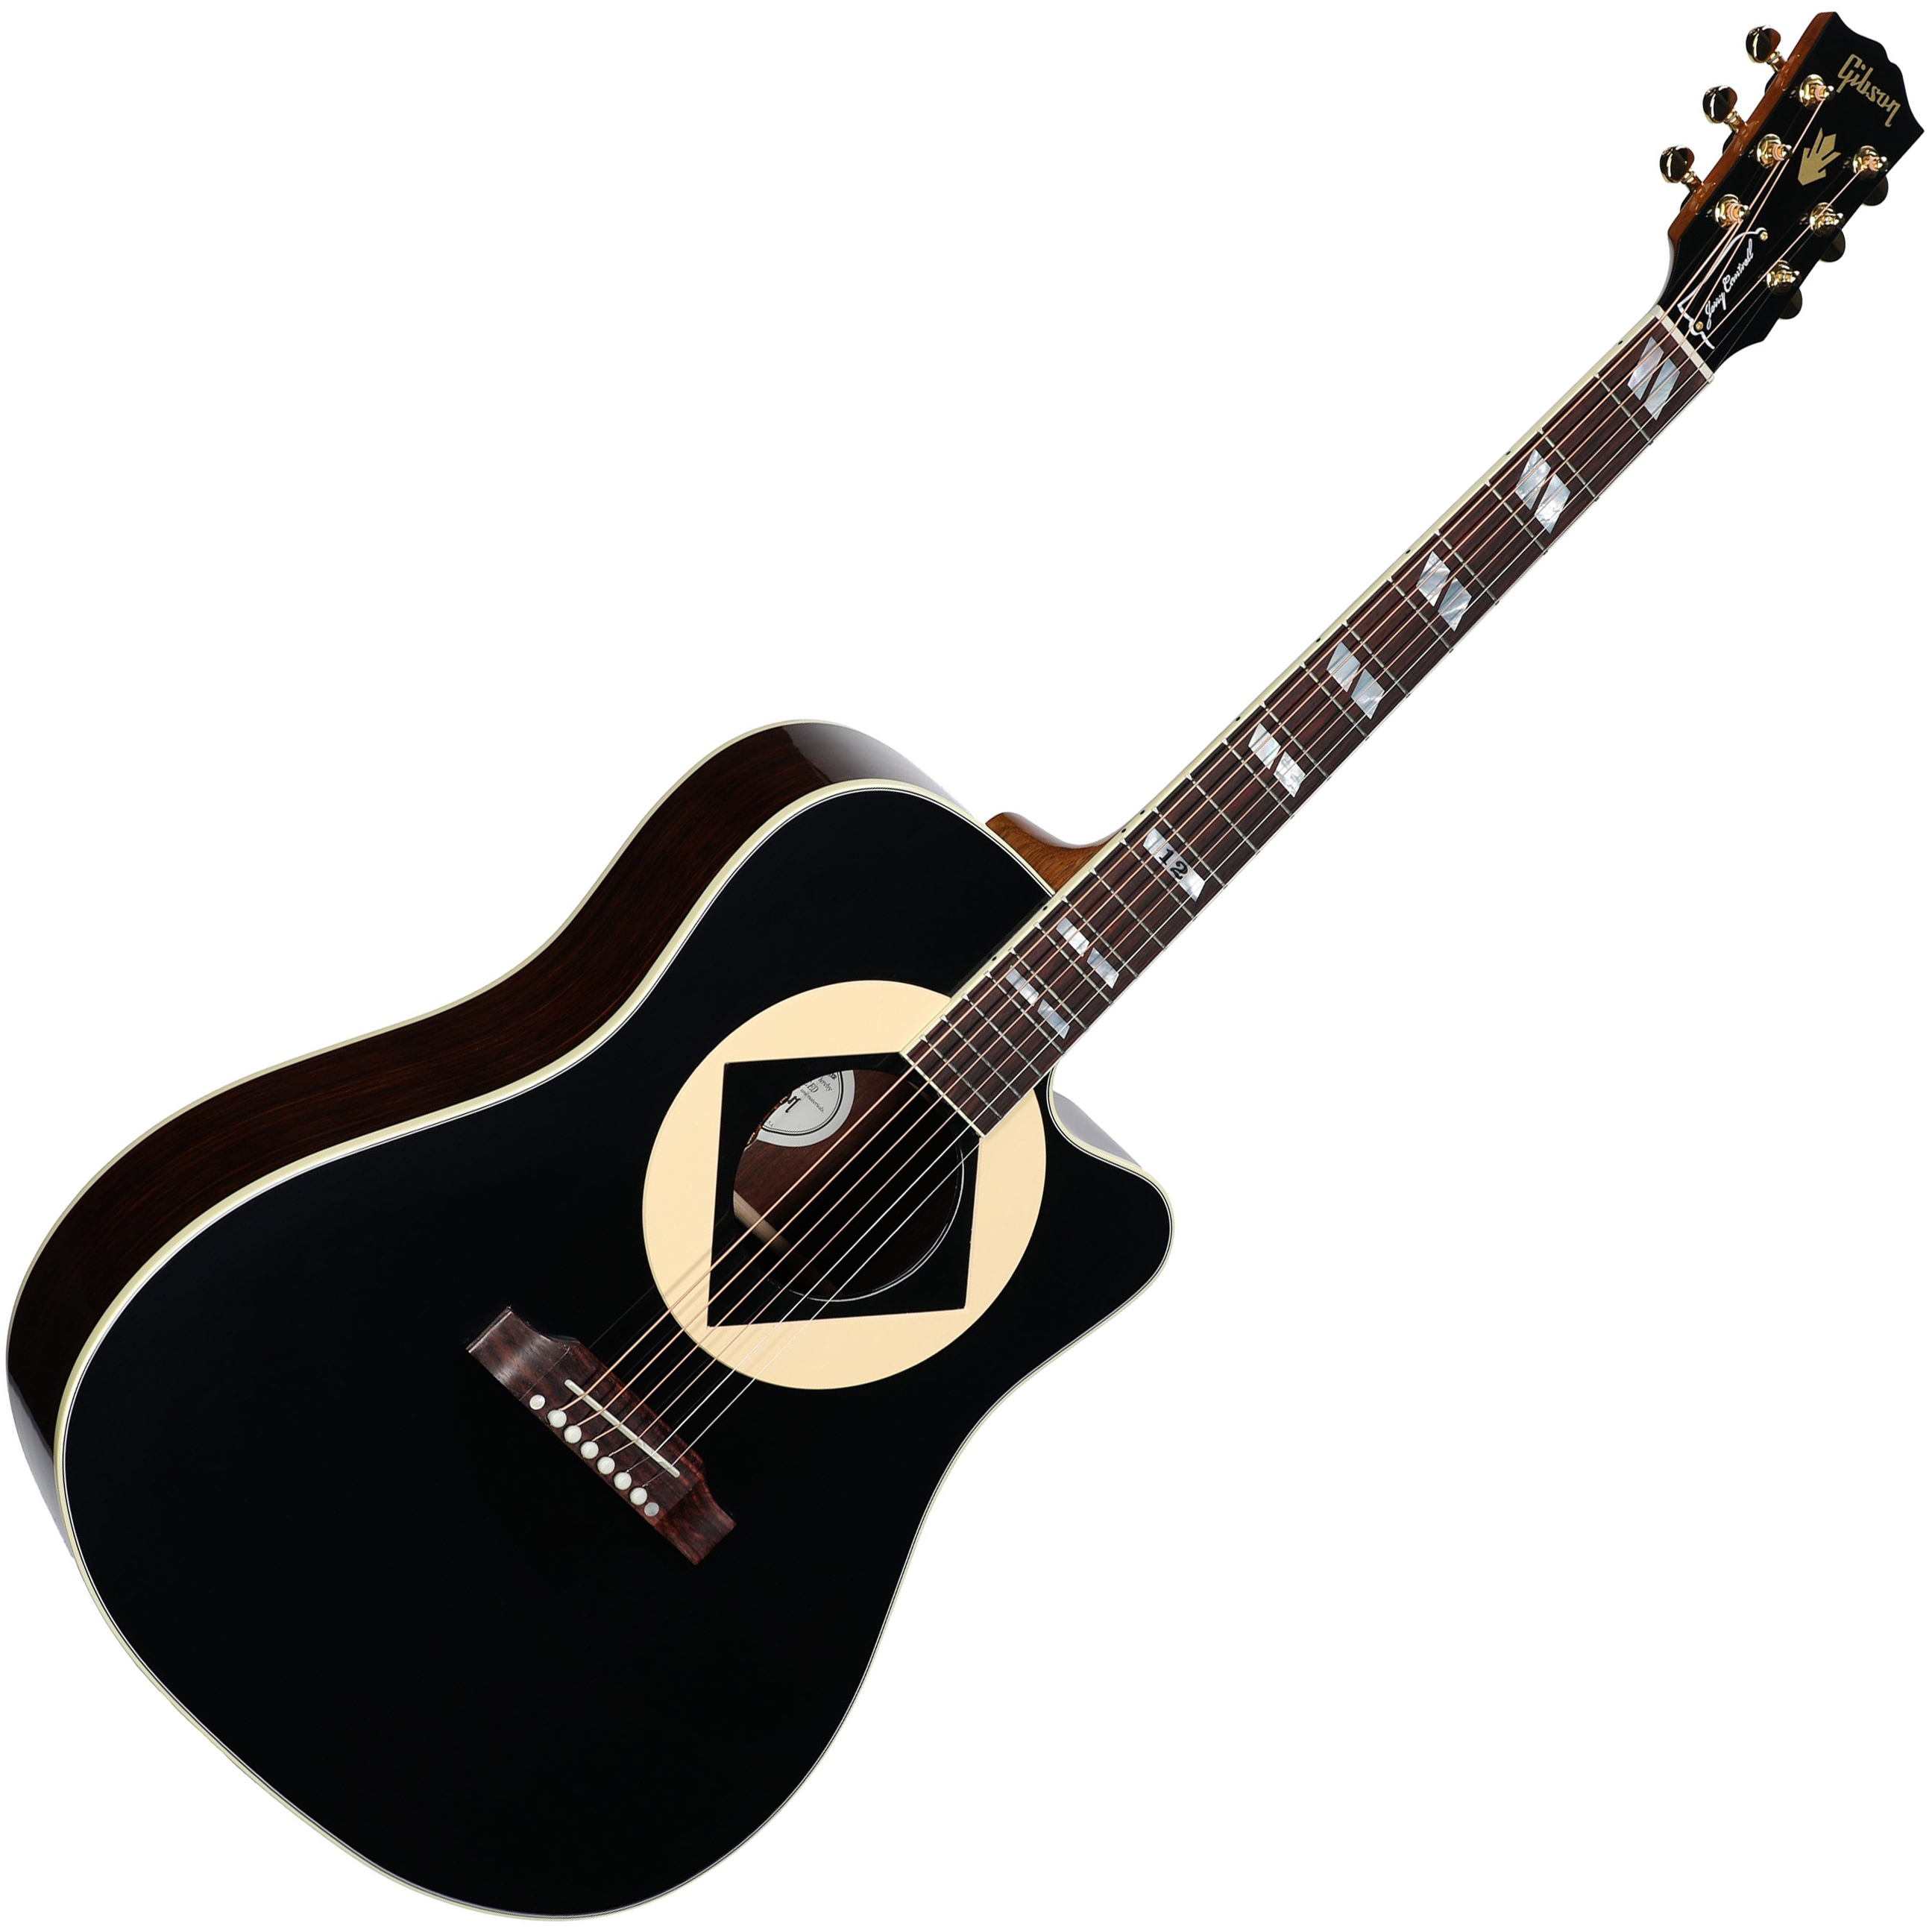 Gibson Jerry Cantrell Songwriter Atone Signature Dreadnought Cw Epicea Palissandre Rw - Ebony - Acoustic guitar & electro - Variation 1